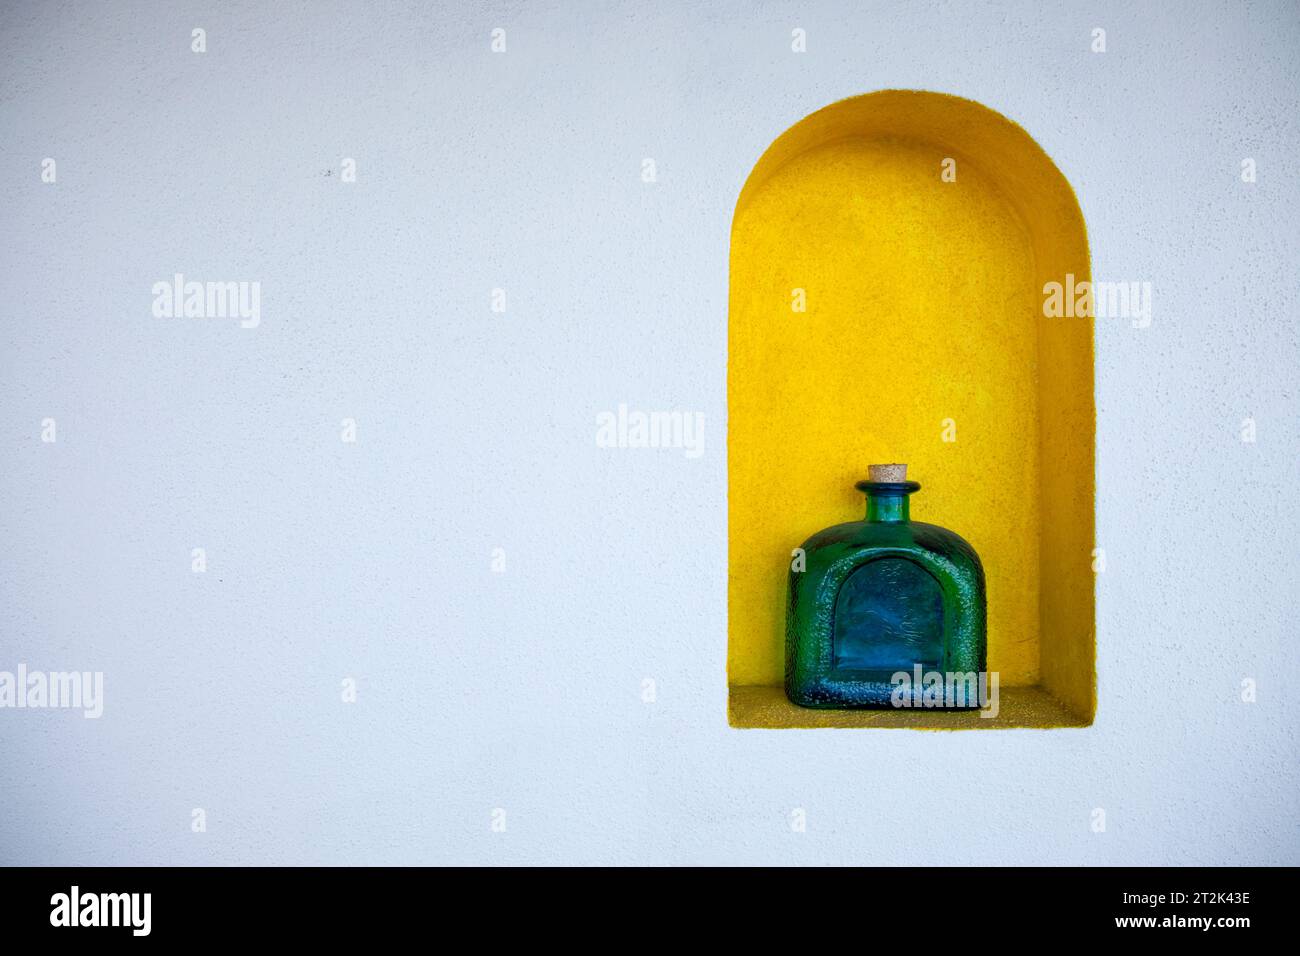 A Tequila bottle in a yellow nook on a white wall. Stock Photo